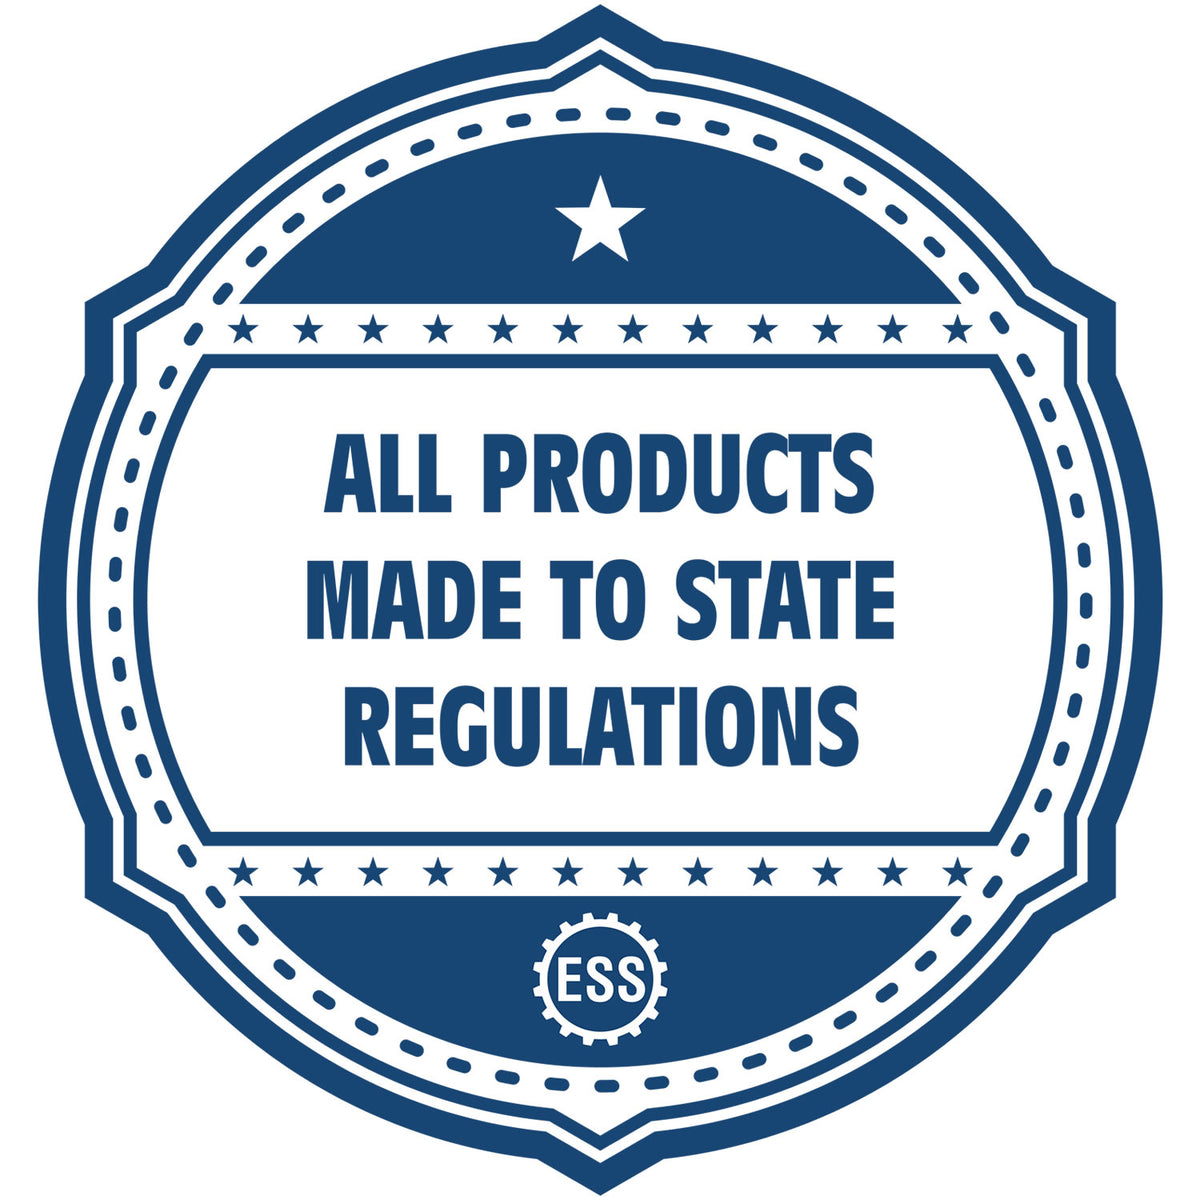 An icon or badge element for the Rhode Island Professional Engineer Seal Stamp showing that this product is made in compliance with state regulations.